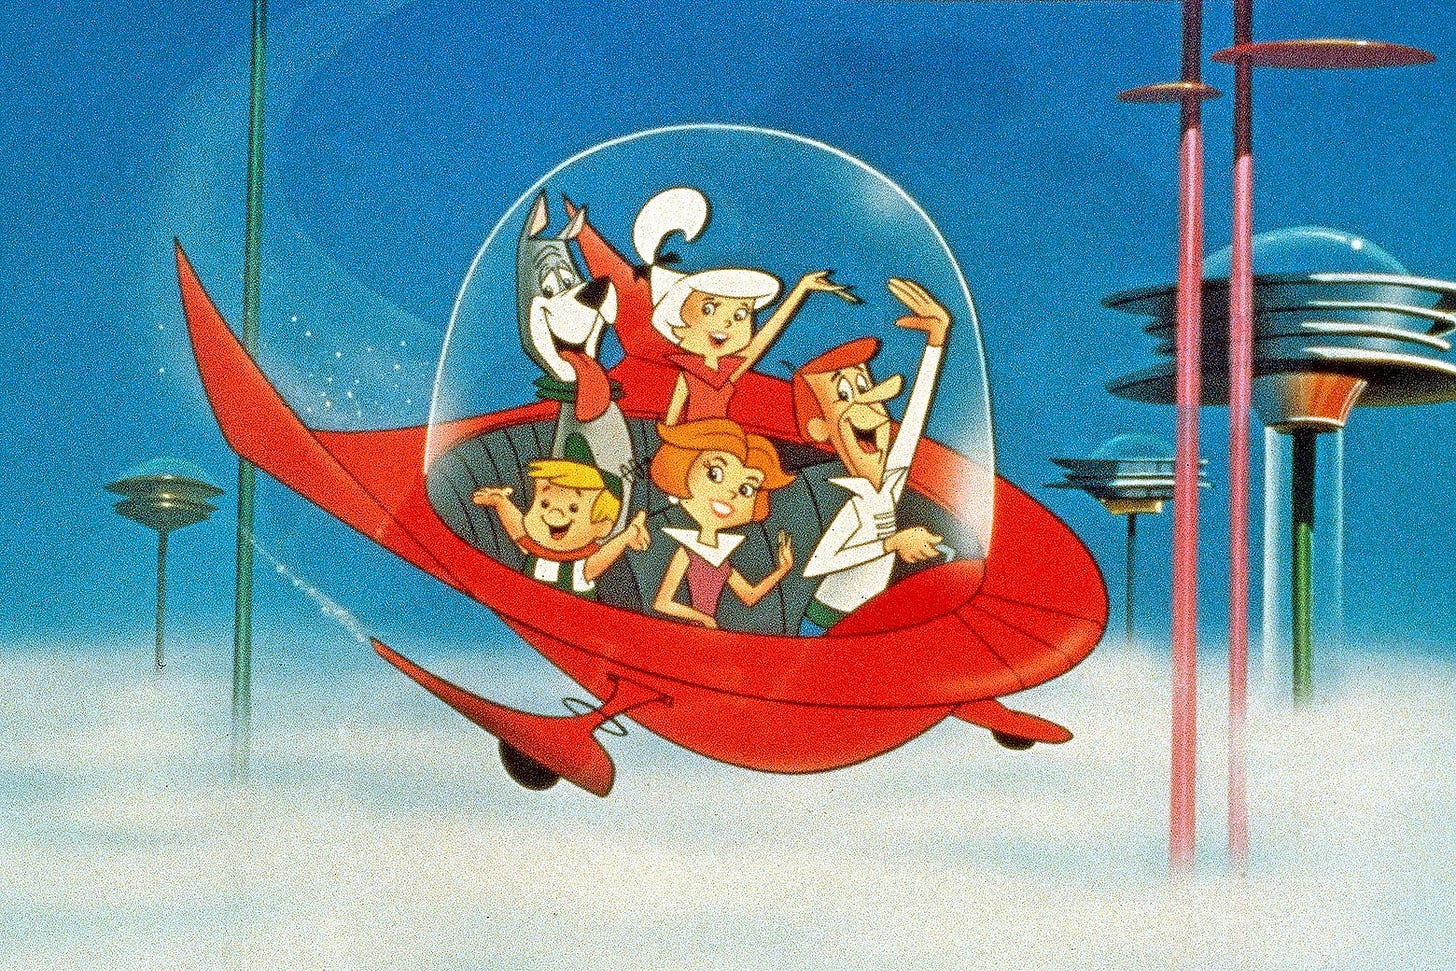 The Jetsons, now 60 years old, is iconic. That's a problem.